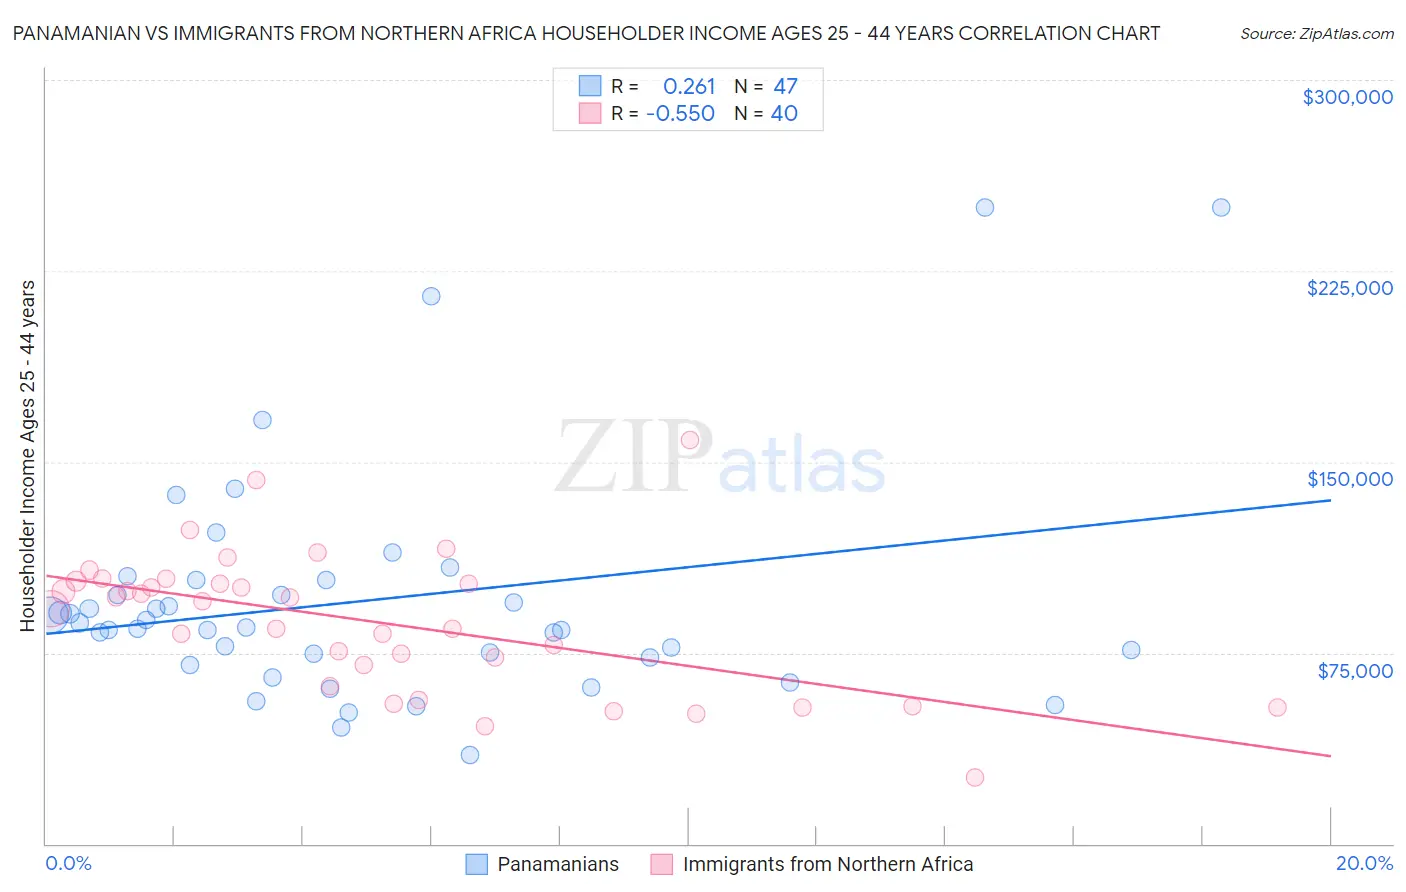 Panamanian vs Immigrants from Northern Africa Householder Income Ages 25 - 44 years